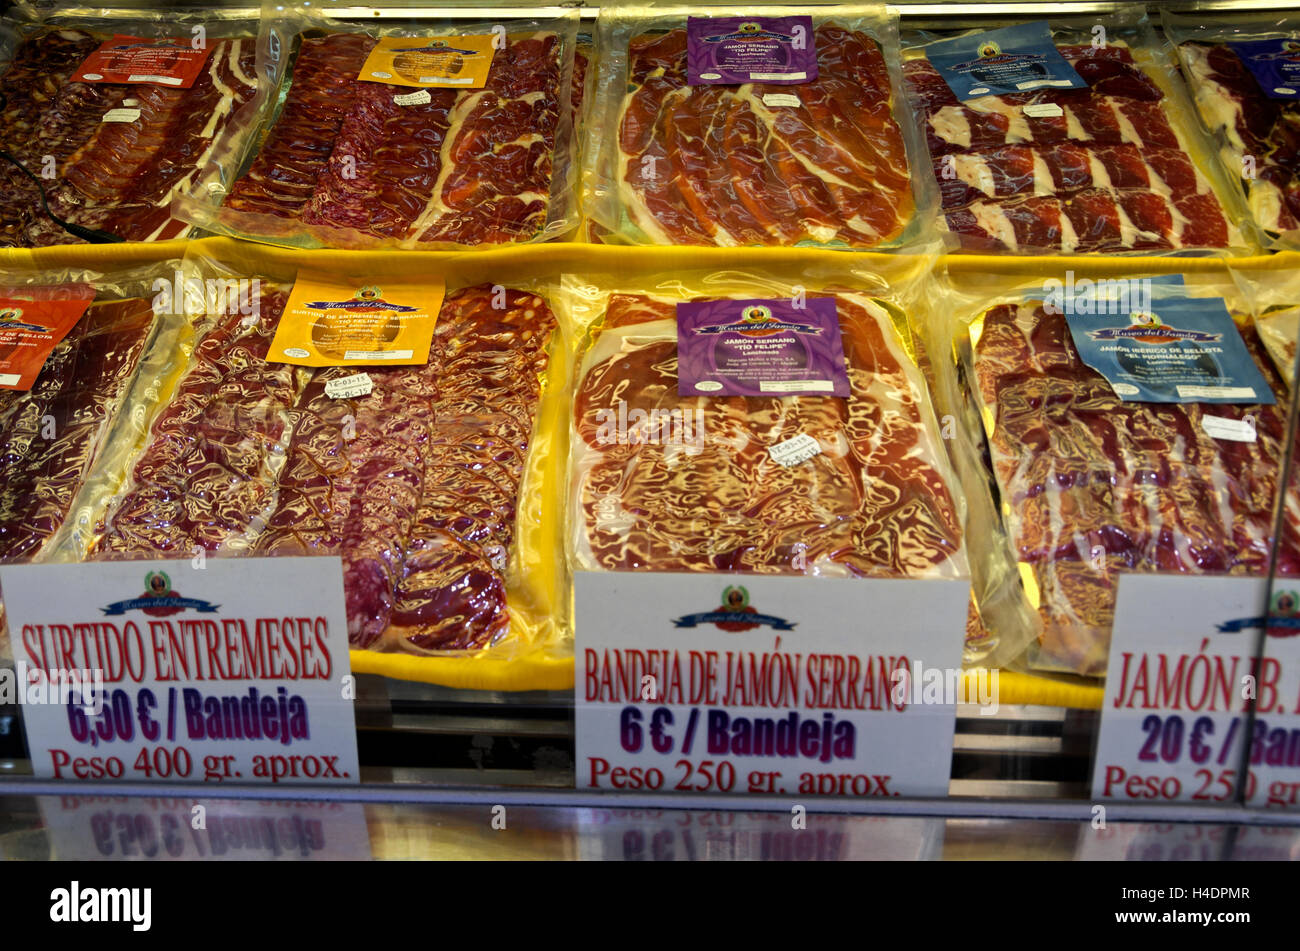 Displays of famous Spanish ham in packets for sale. Stock Photo